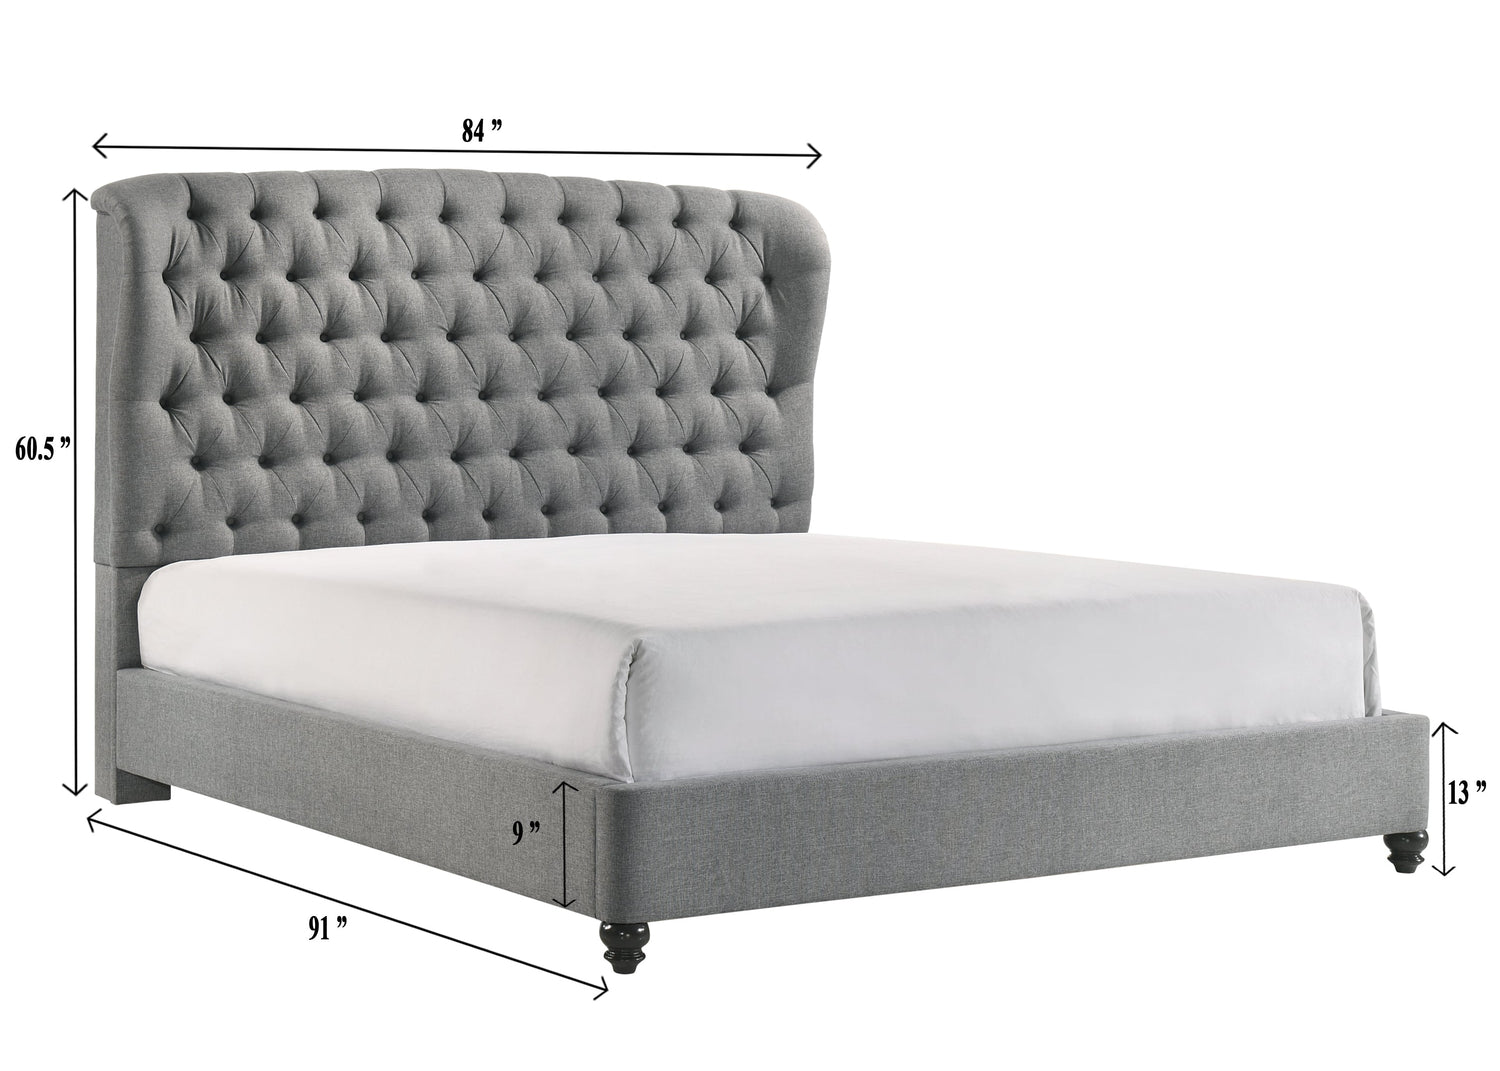 Linda Gray King Upholstered Panel Bed - SET | 5138GY-K-HBFB | 5138GY-KQ-RAIL - Bien Home Furniture &amp; Electronics